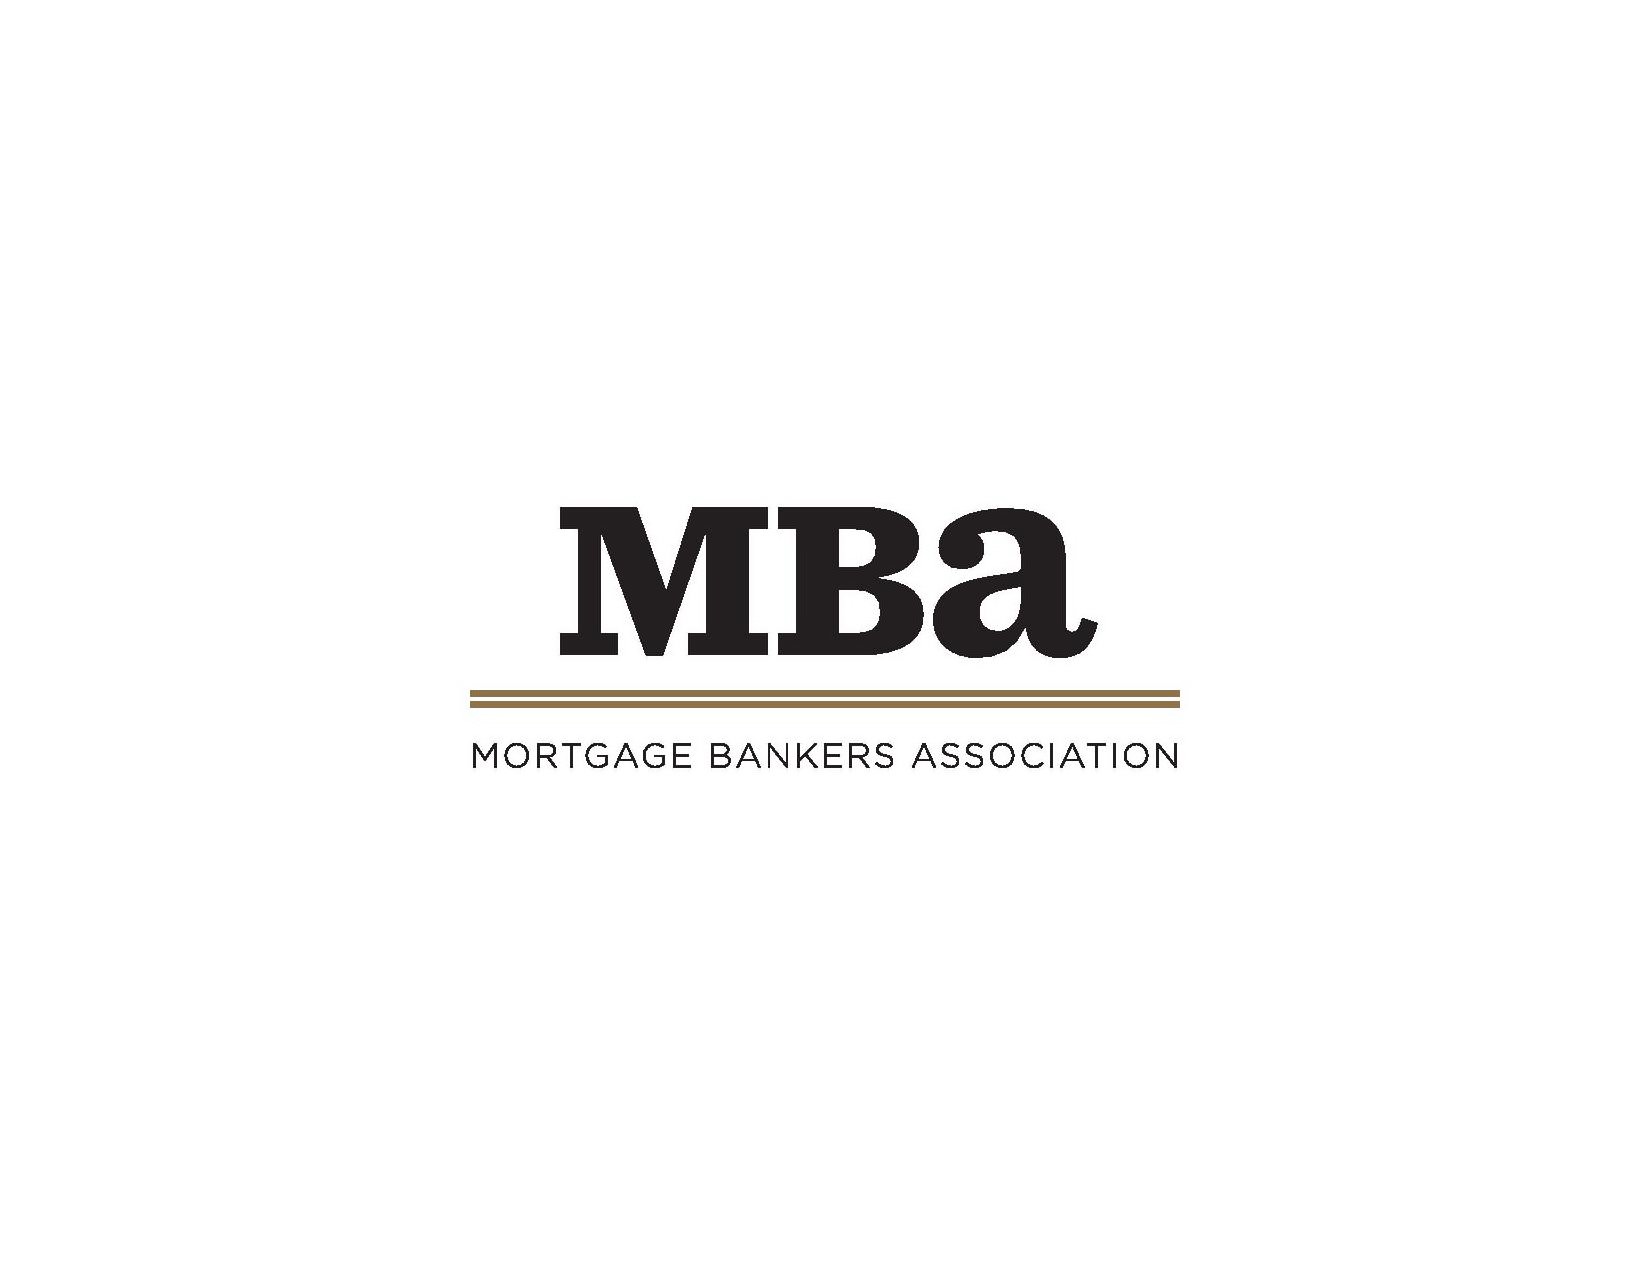  MBA MORTGAGE BANKERS ASSOCIATION